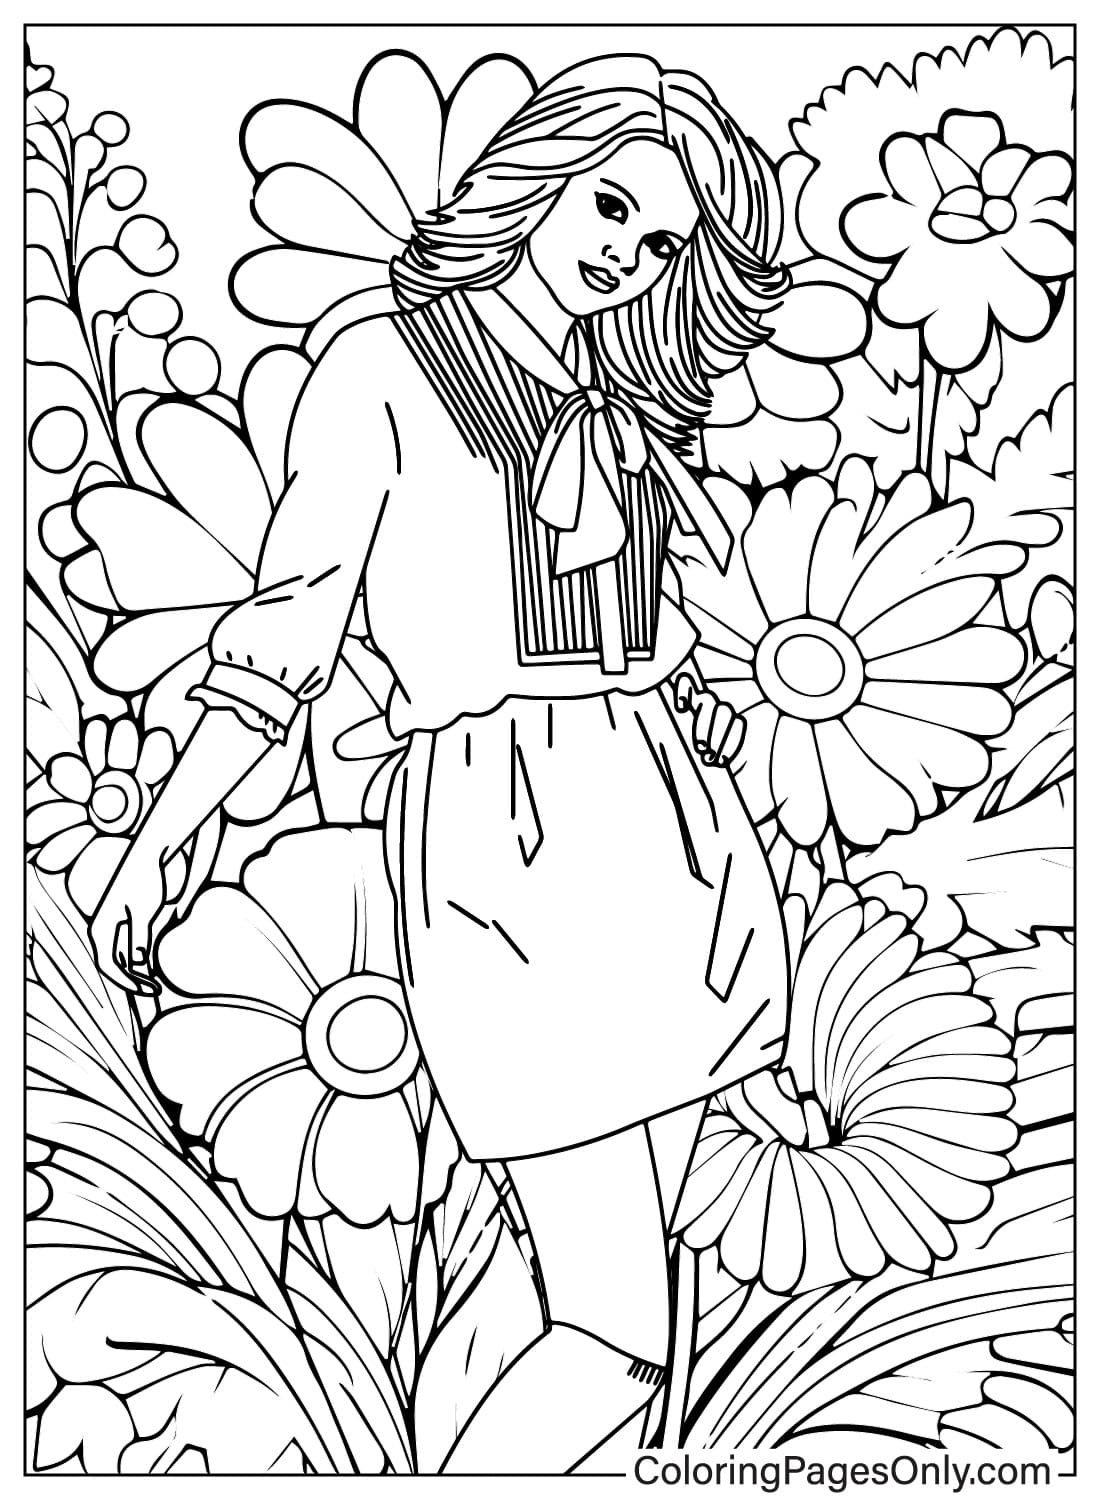 Flower and Selena Gomez Coloring Page - Free Printable Coloring Pages